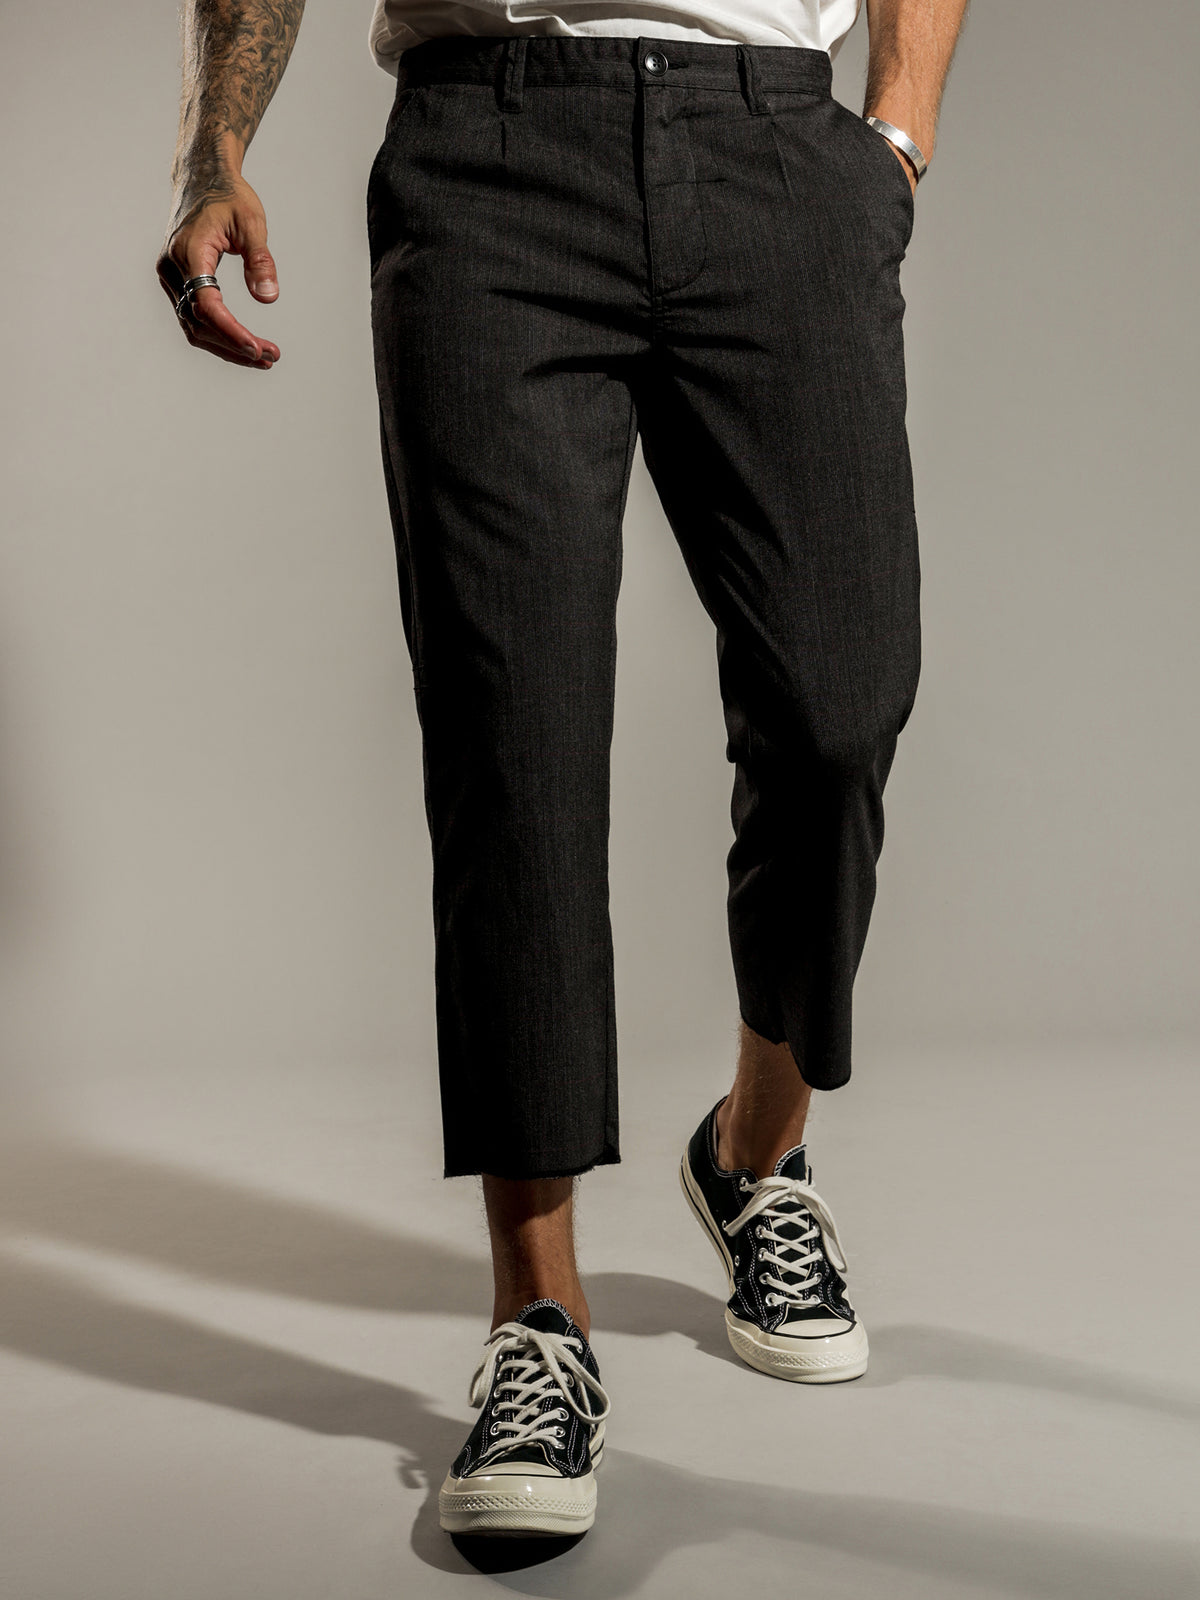 Parallels Chopped Chino Pants in Dark Charcoal